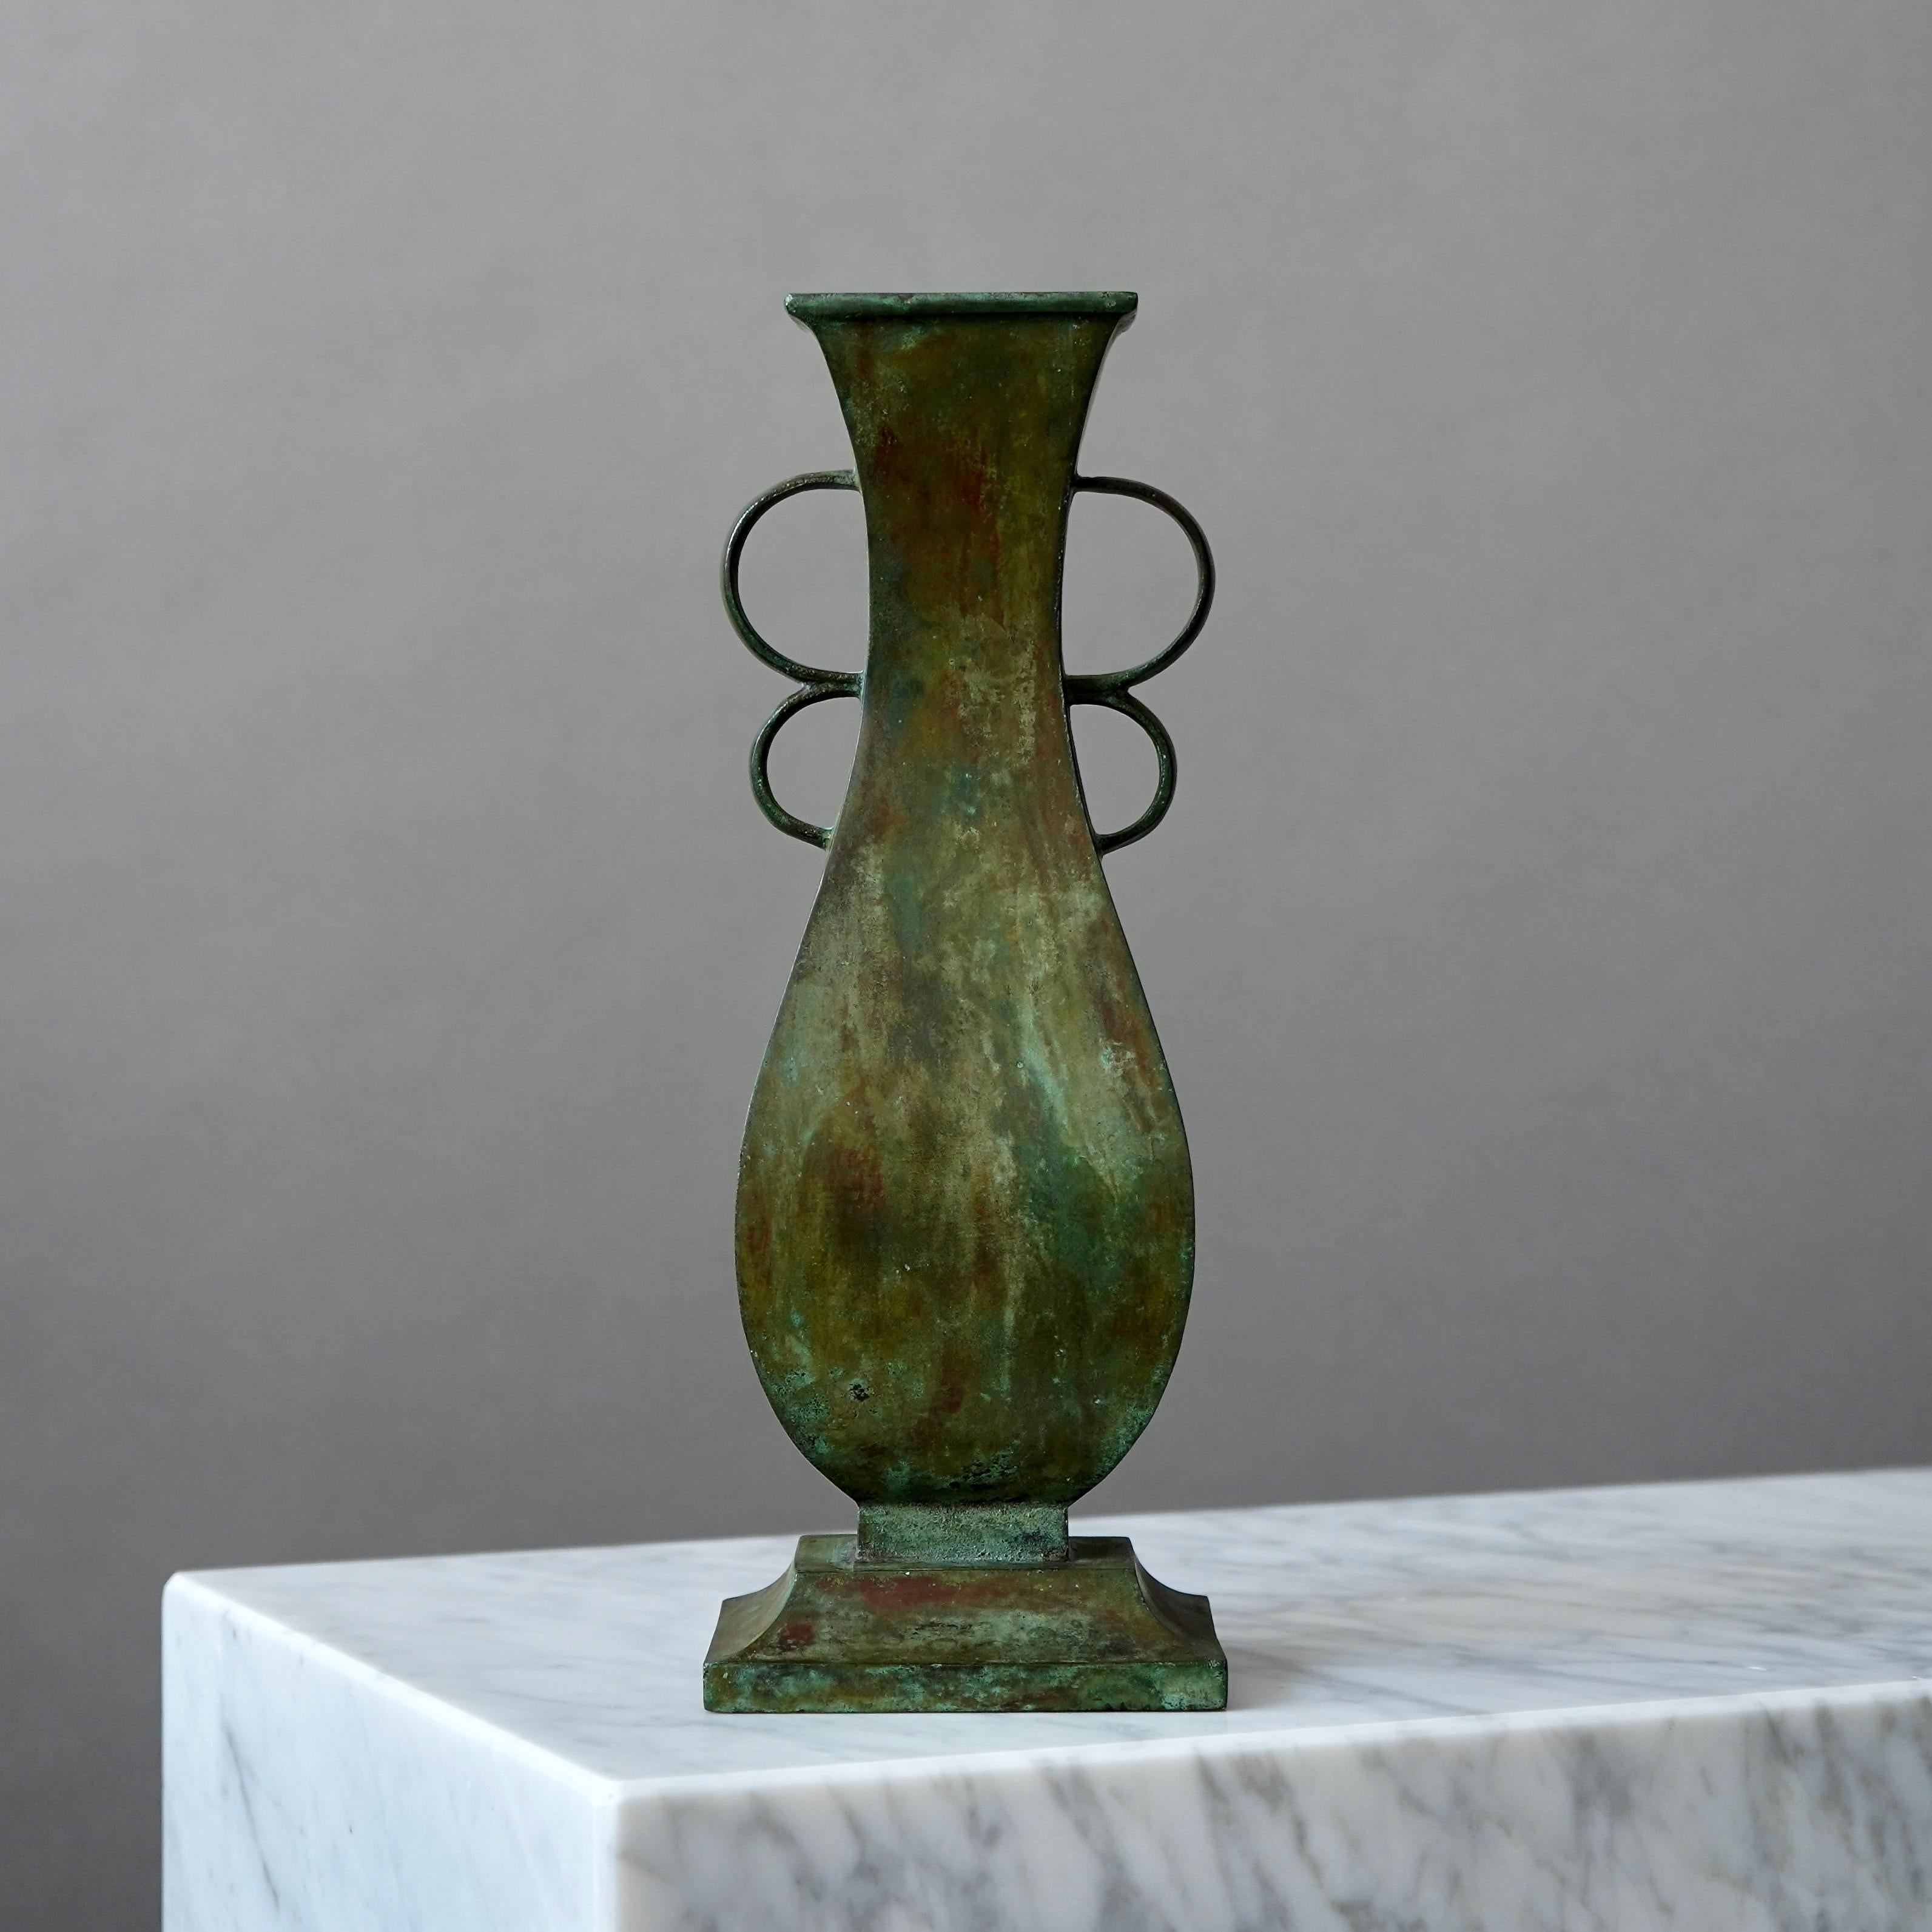 A large and beautiful bronze vase with amazing patina. Designed by Sune Bäckström in Malmoe, Sweden, 1920s.  

Great condition.
Stamped 'BRONS', model number '9017' and signature 'Sune Bäckström'.

Produced by Einar Bäckström Metallvarufabrik in